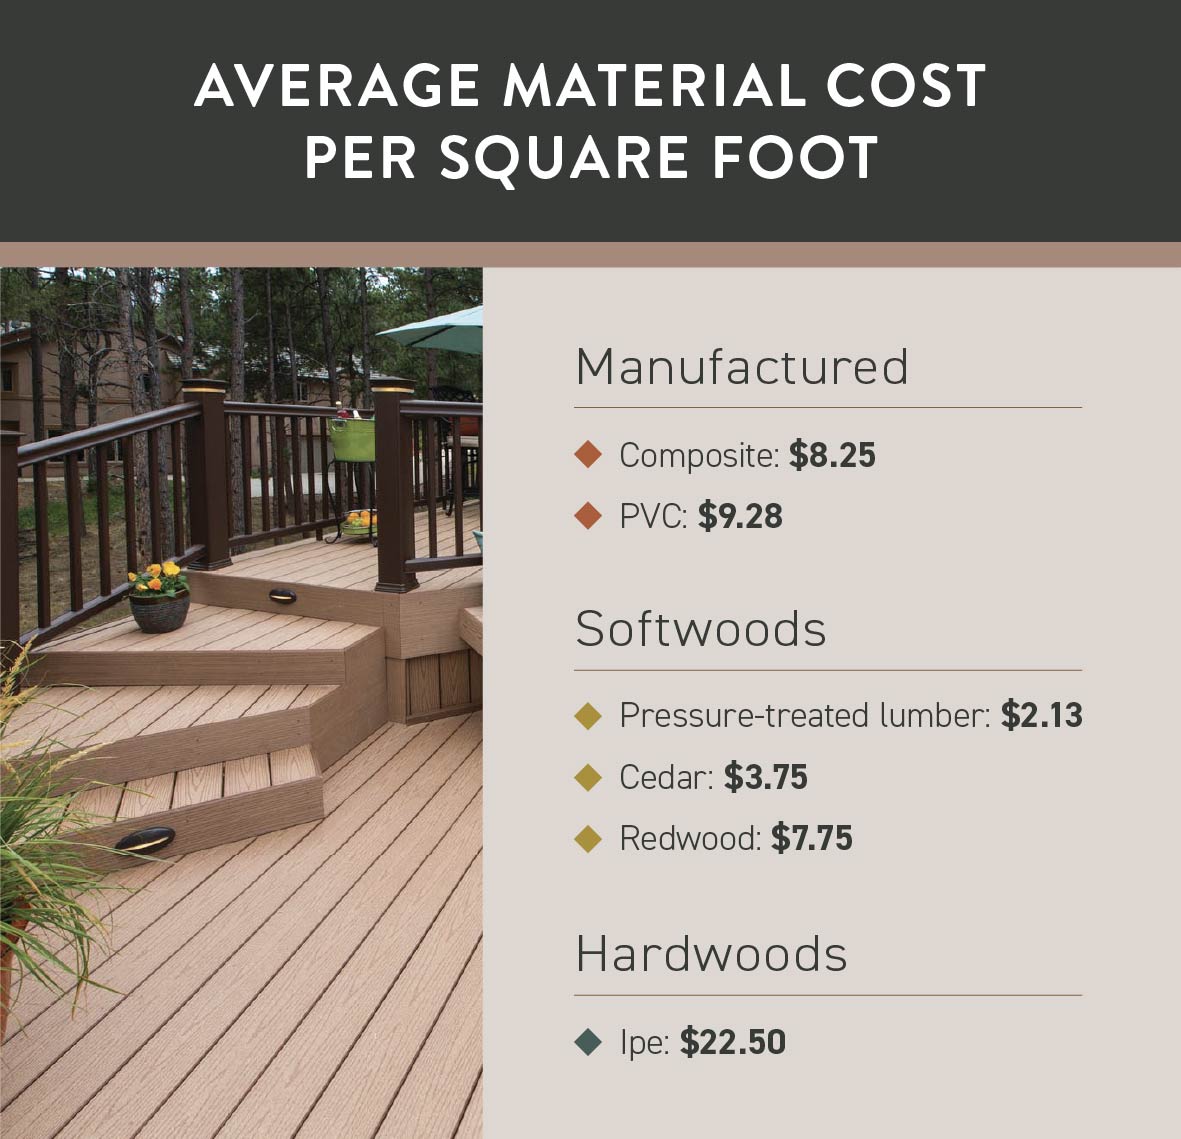 A photo of a deck lists average material costs per square foot for manufactured, softwood, and hardwood decking that corresponds with the list below. 